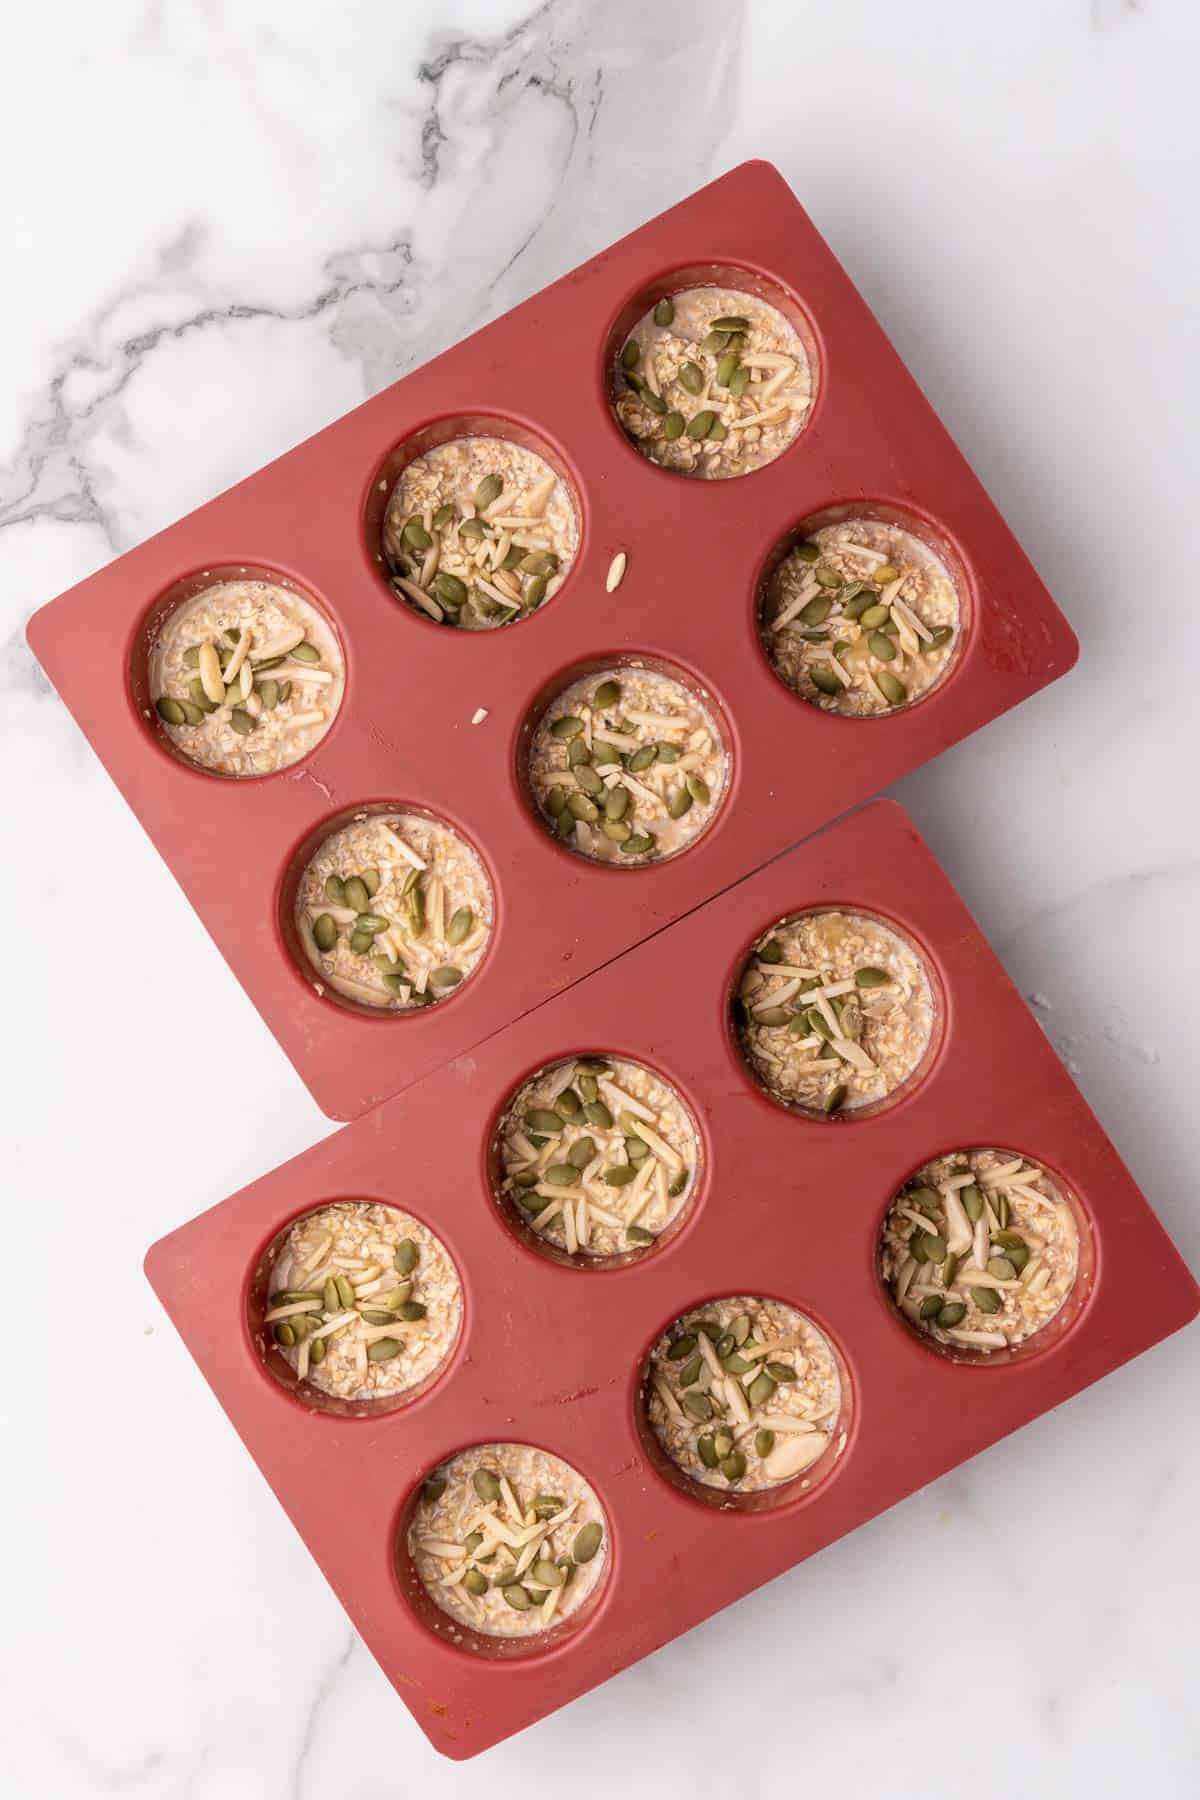 Muffin batter poured into two red silicone muffin pan with six muffins in each pan, as seen from above on a white backdrop